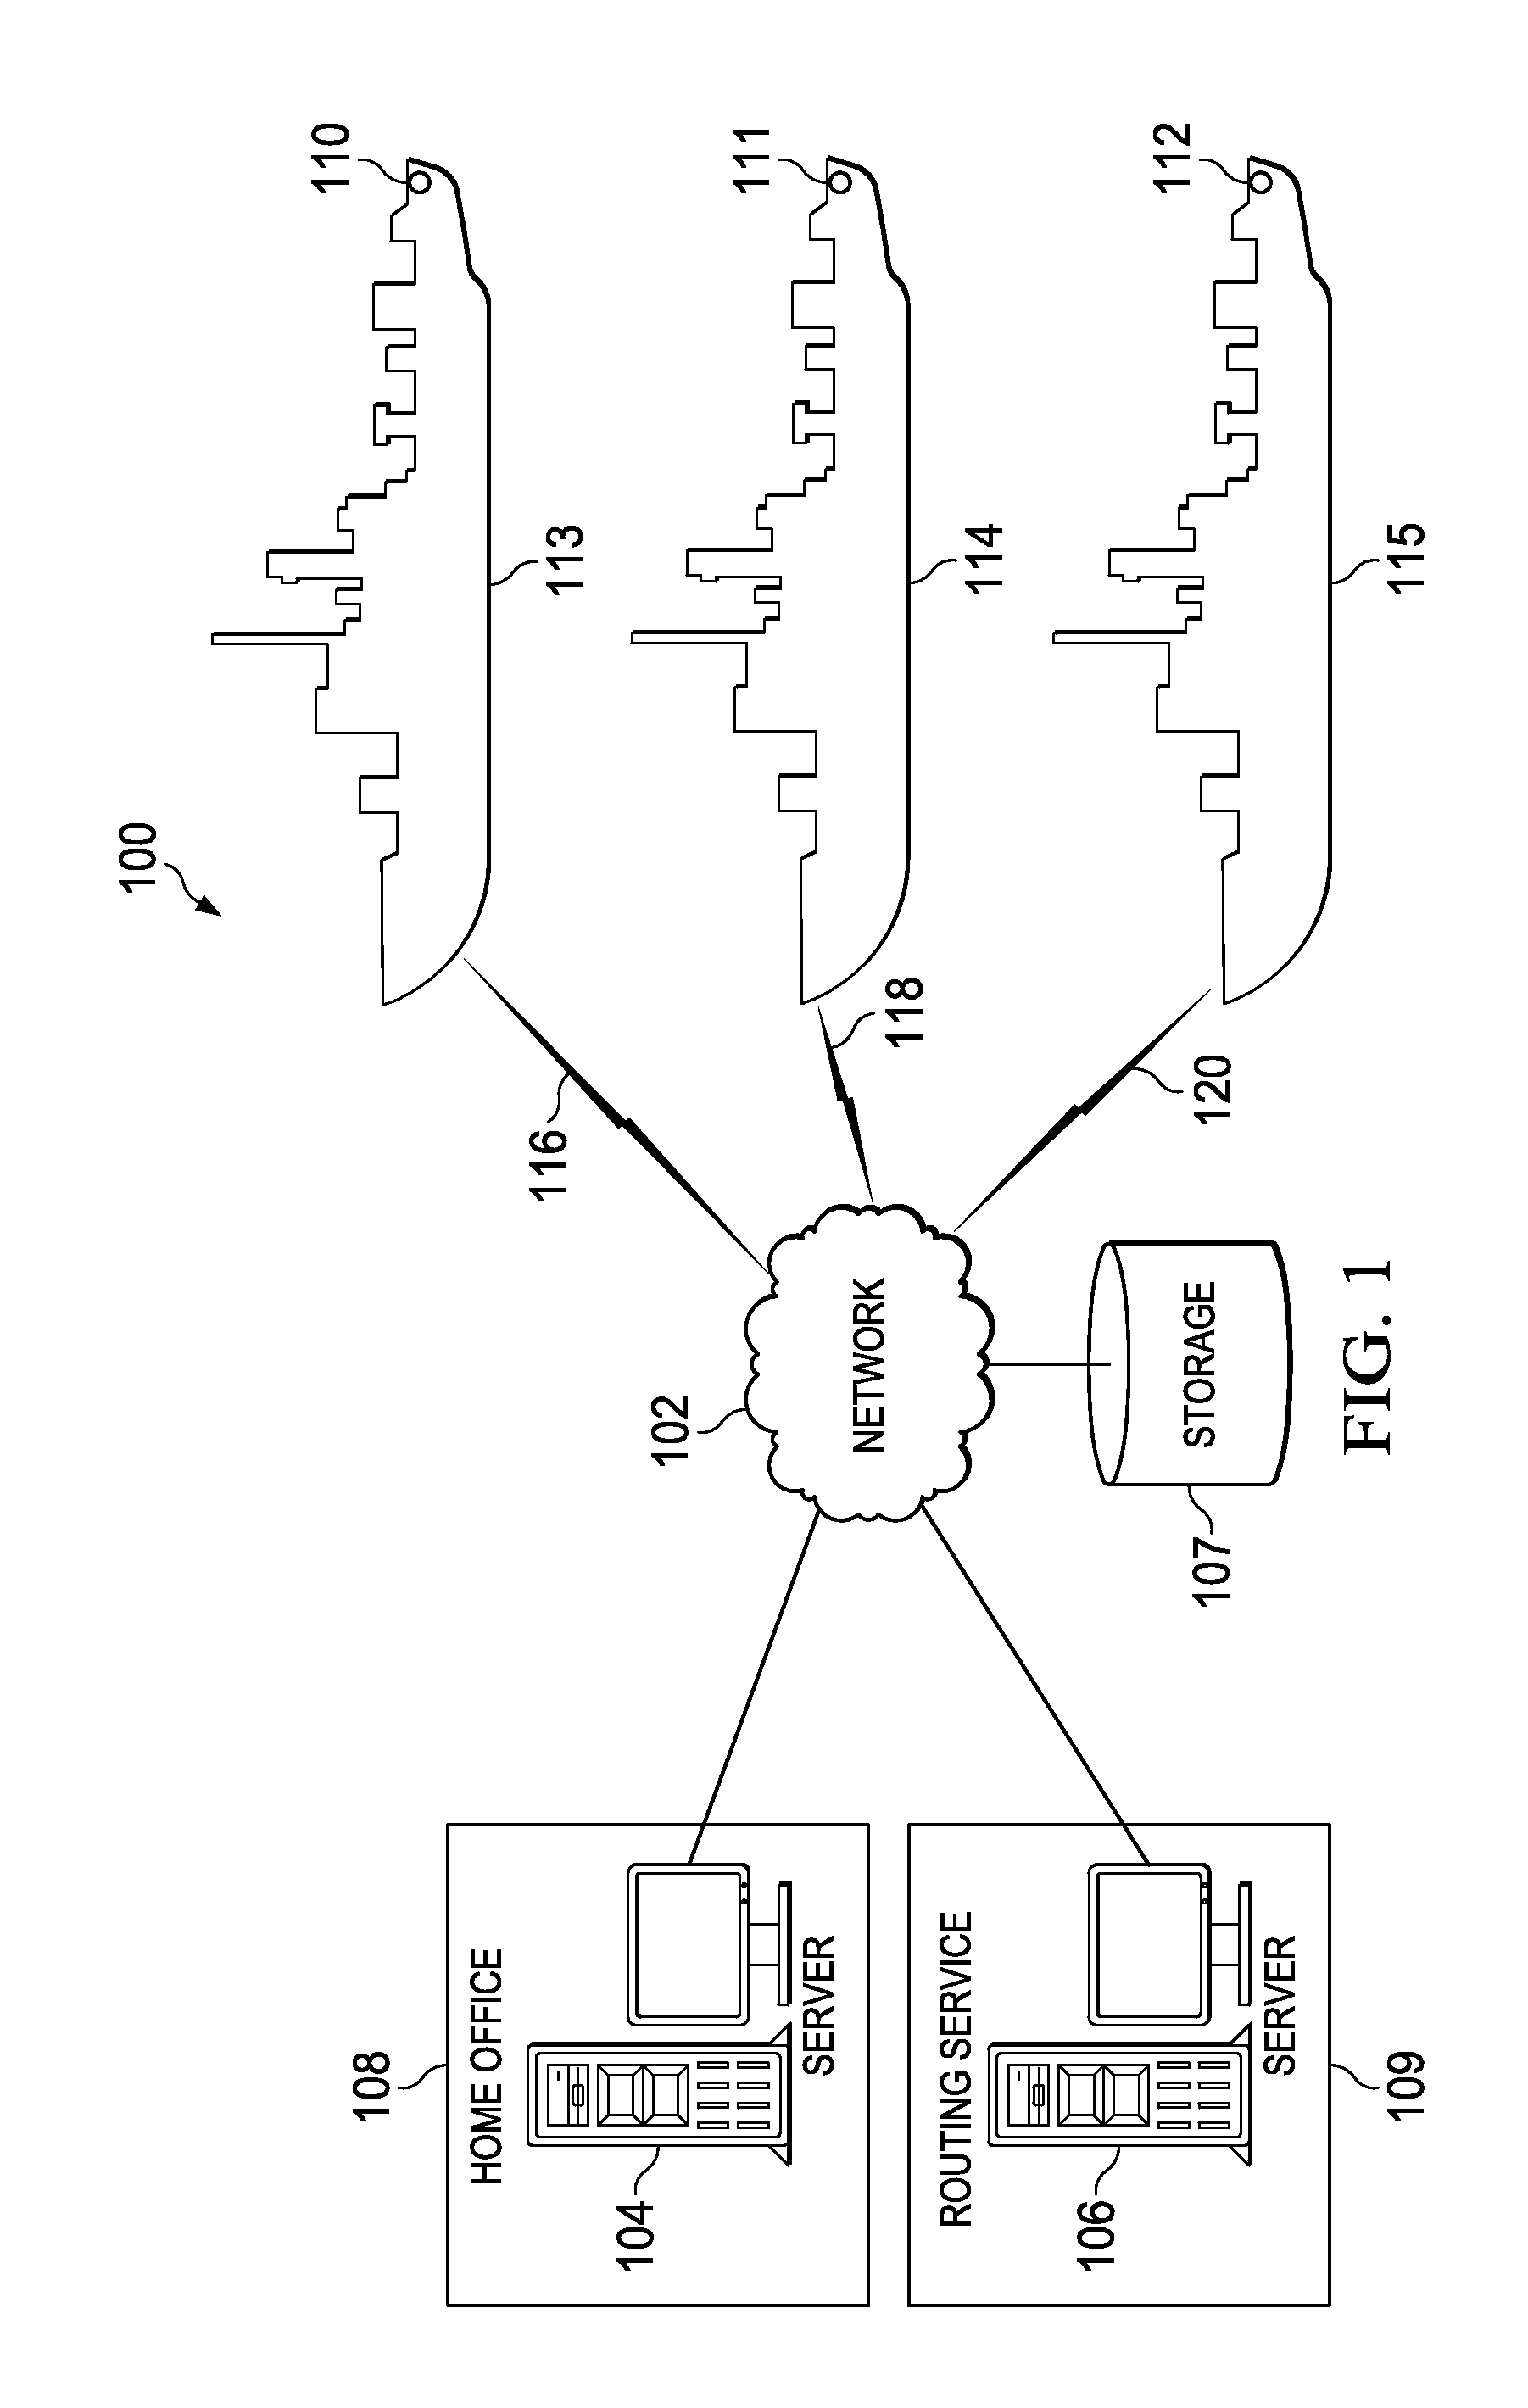 Vessel routing system